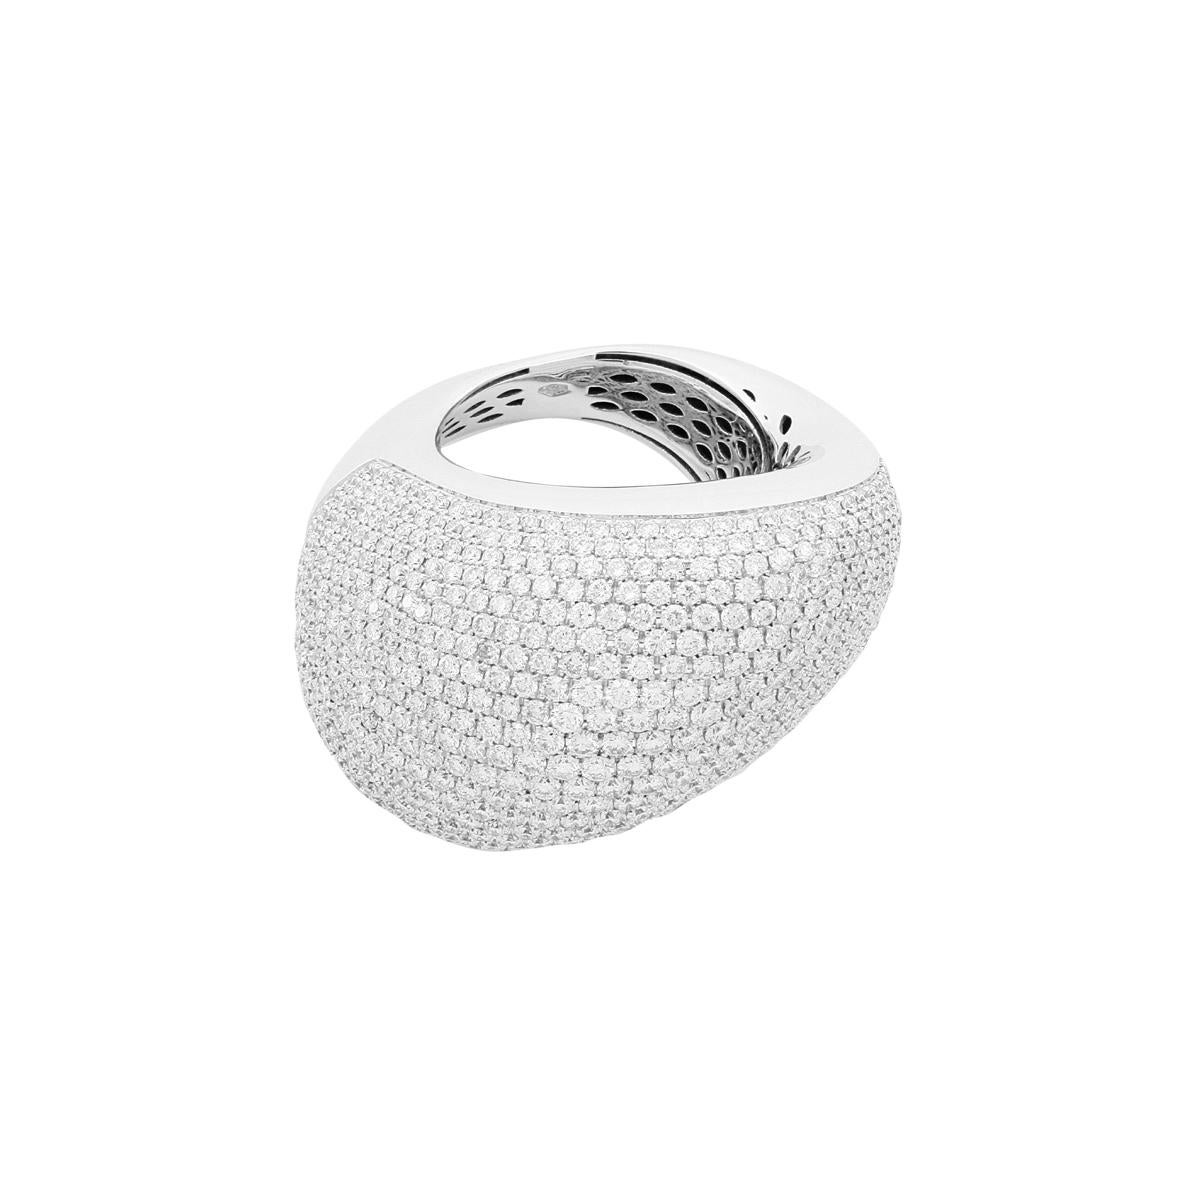 Brighten up the room with this stunning slanted dome ring, designed and handcrafted by a talented artisan in Italy. The dome shape of this stunning cocktail ring not only makes this piece more daring, but also increases the surface area where the